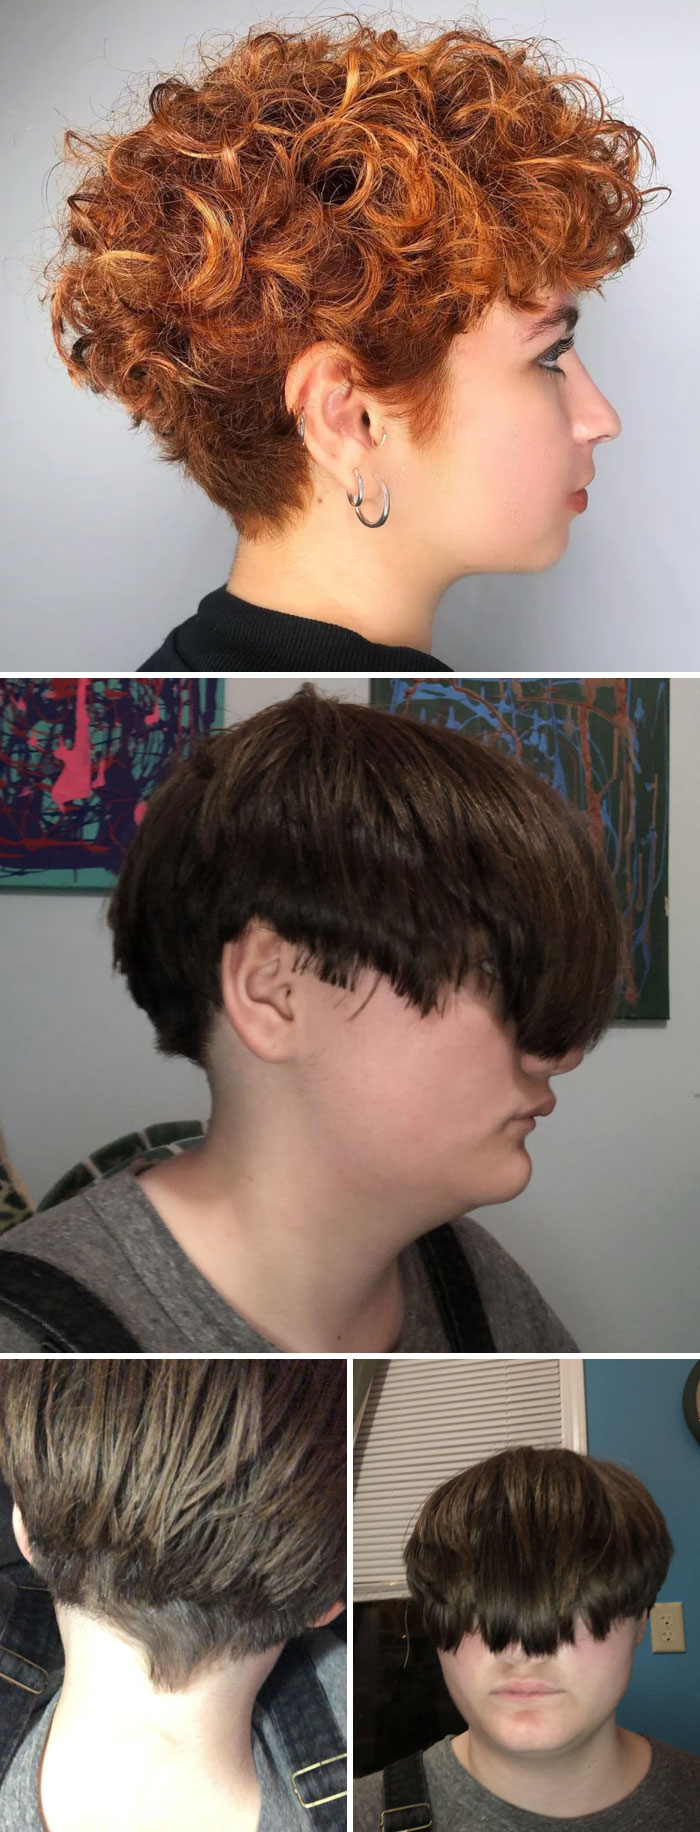 Haircut Expectation vs. Reality. Paid $35 (Was Going To Get It Permed But Almost Nobody Does Perms In Our Area)